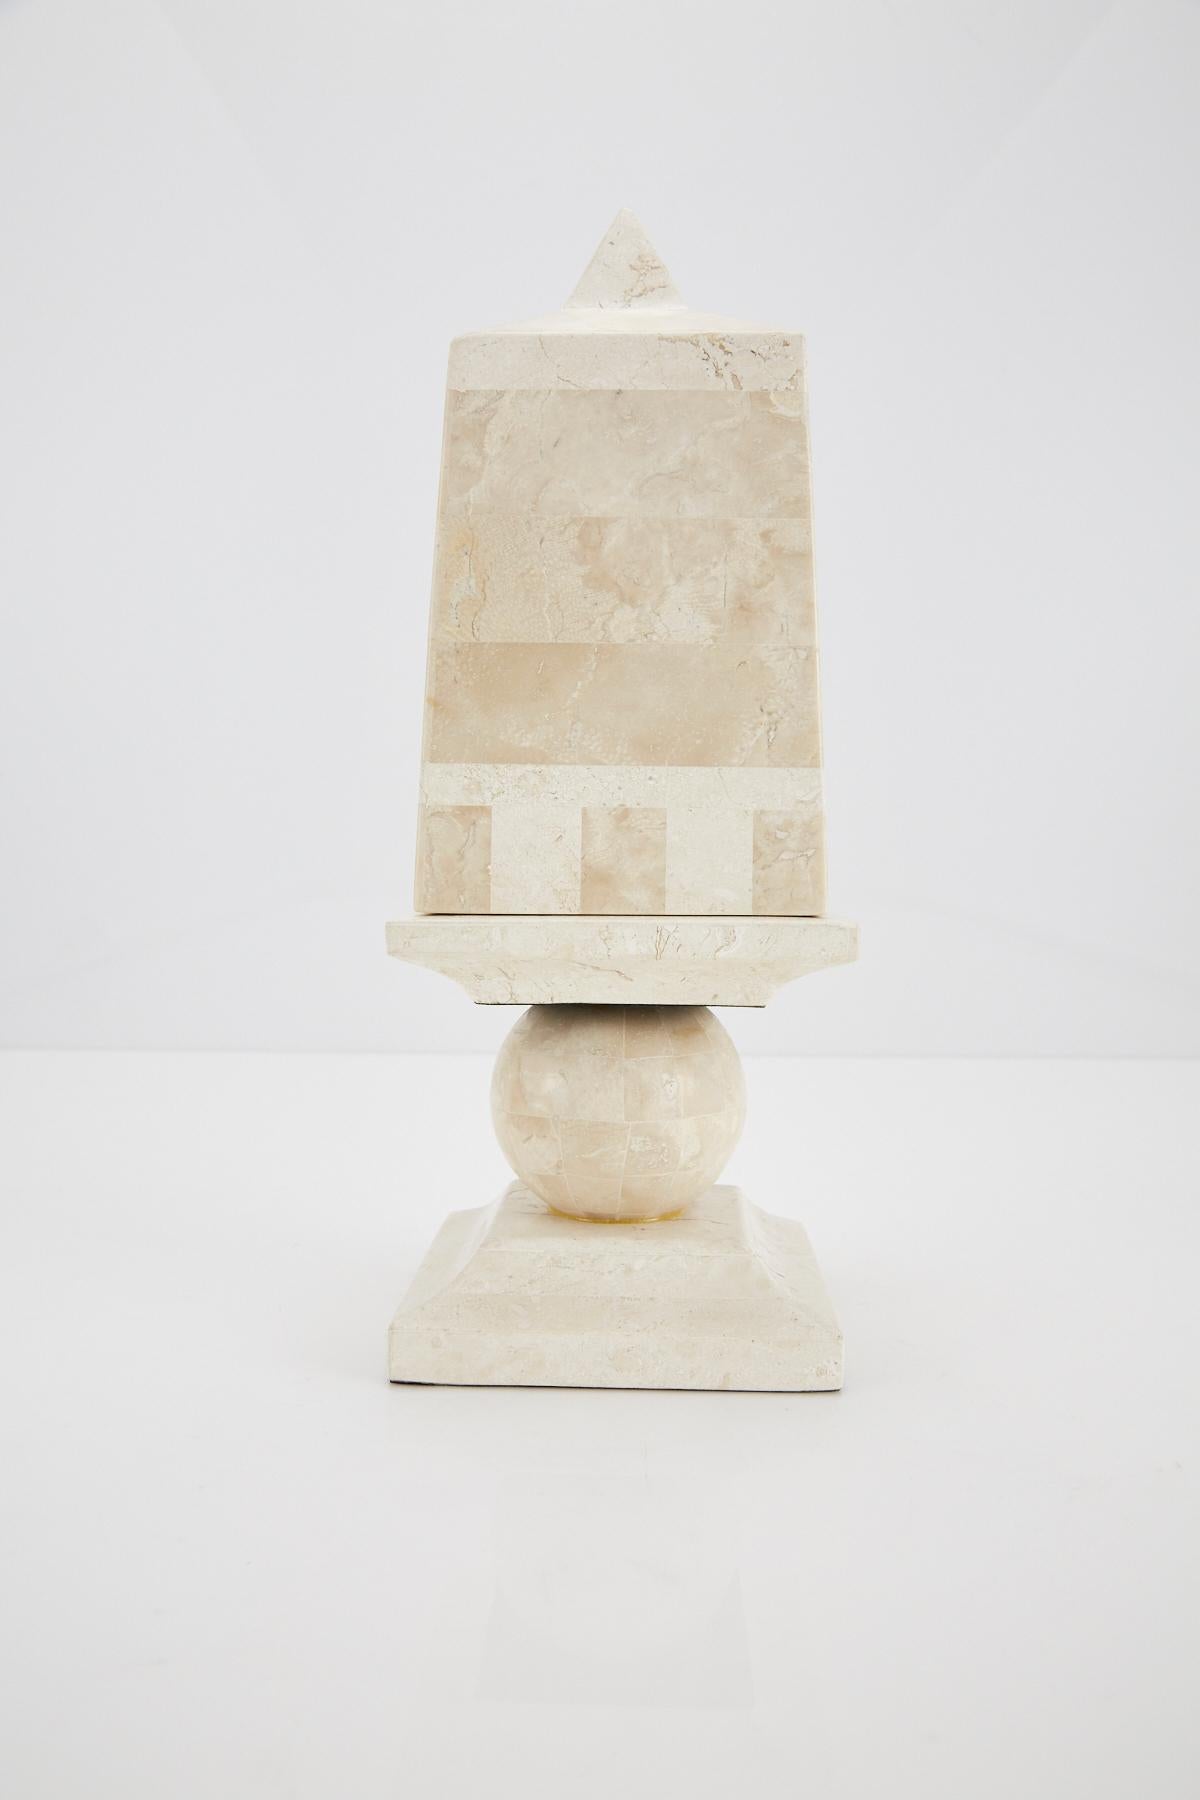 Postmodern Obelisk Shaped Two-Toned Tessellated Stone Secret Box, 1990s For Sale 2